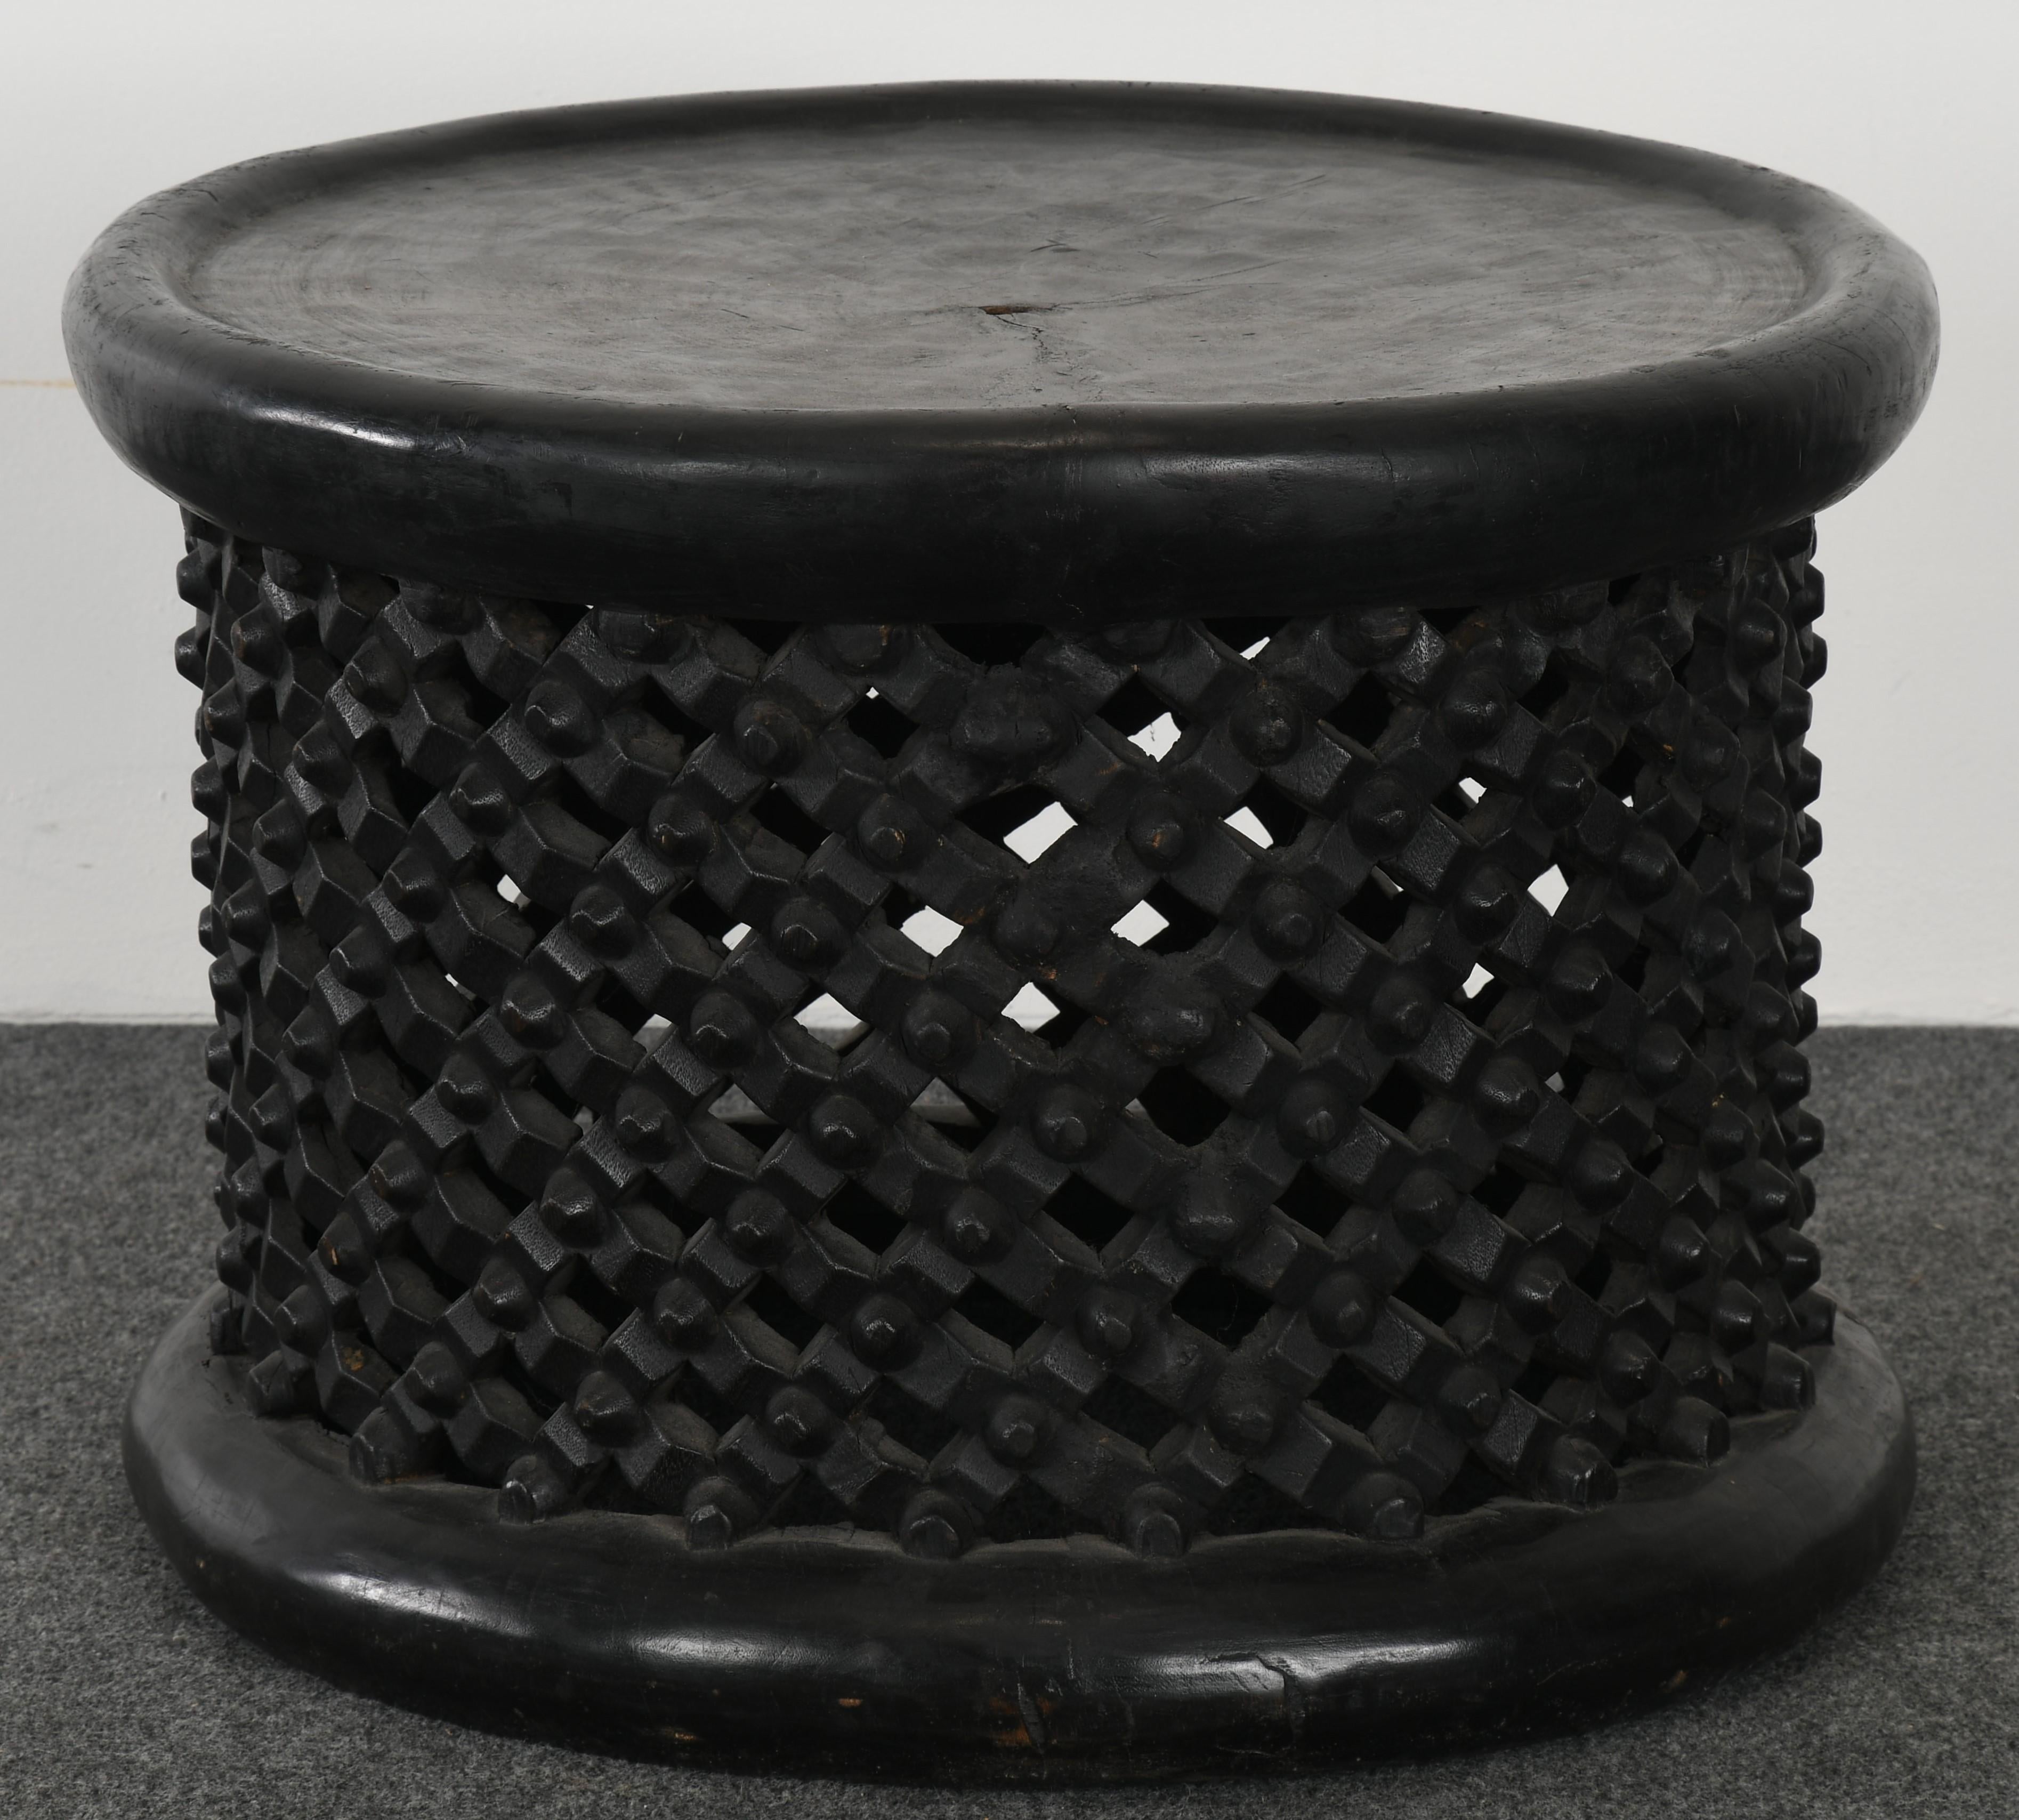 A Cameroon wood drum table with pierced and carved lattice base. The size and height is great to use as a stool, side table, or occasional table. The lattice work on the bench is in good condition, however, due to the inherent nature of solid wood